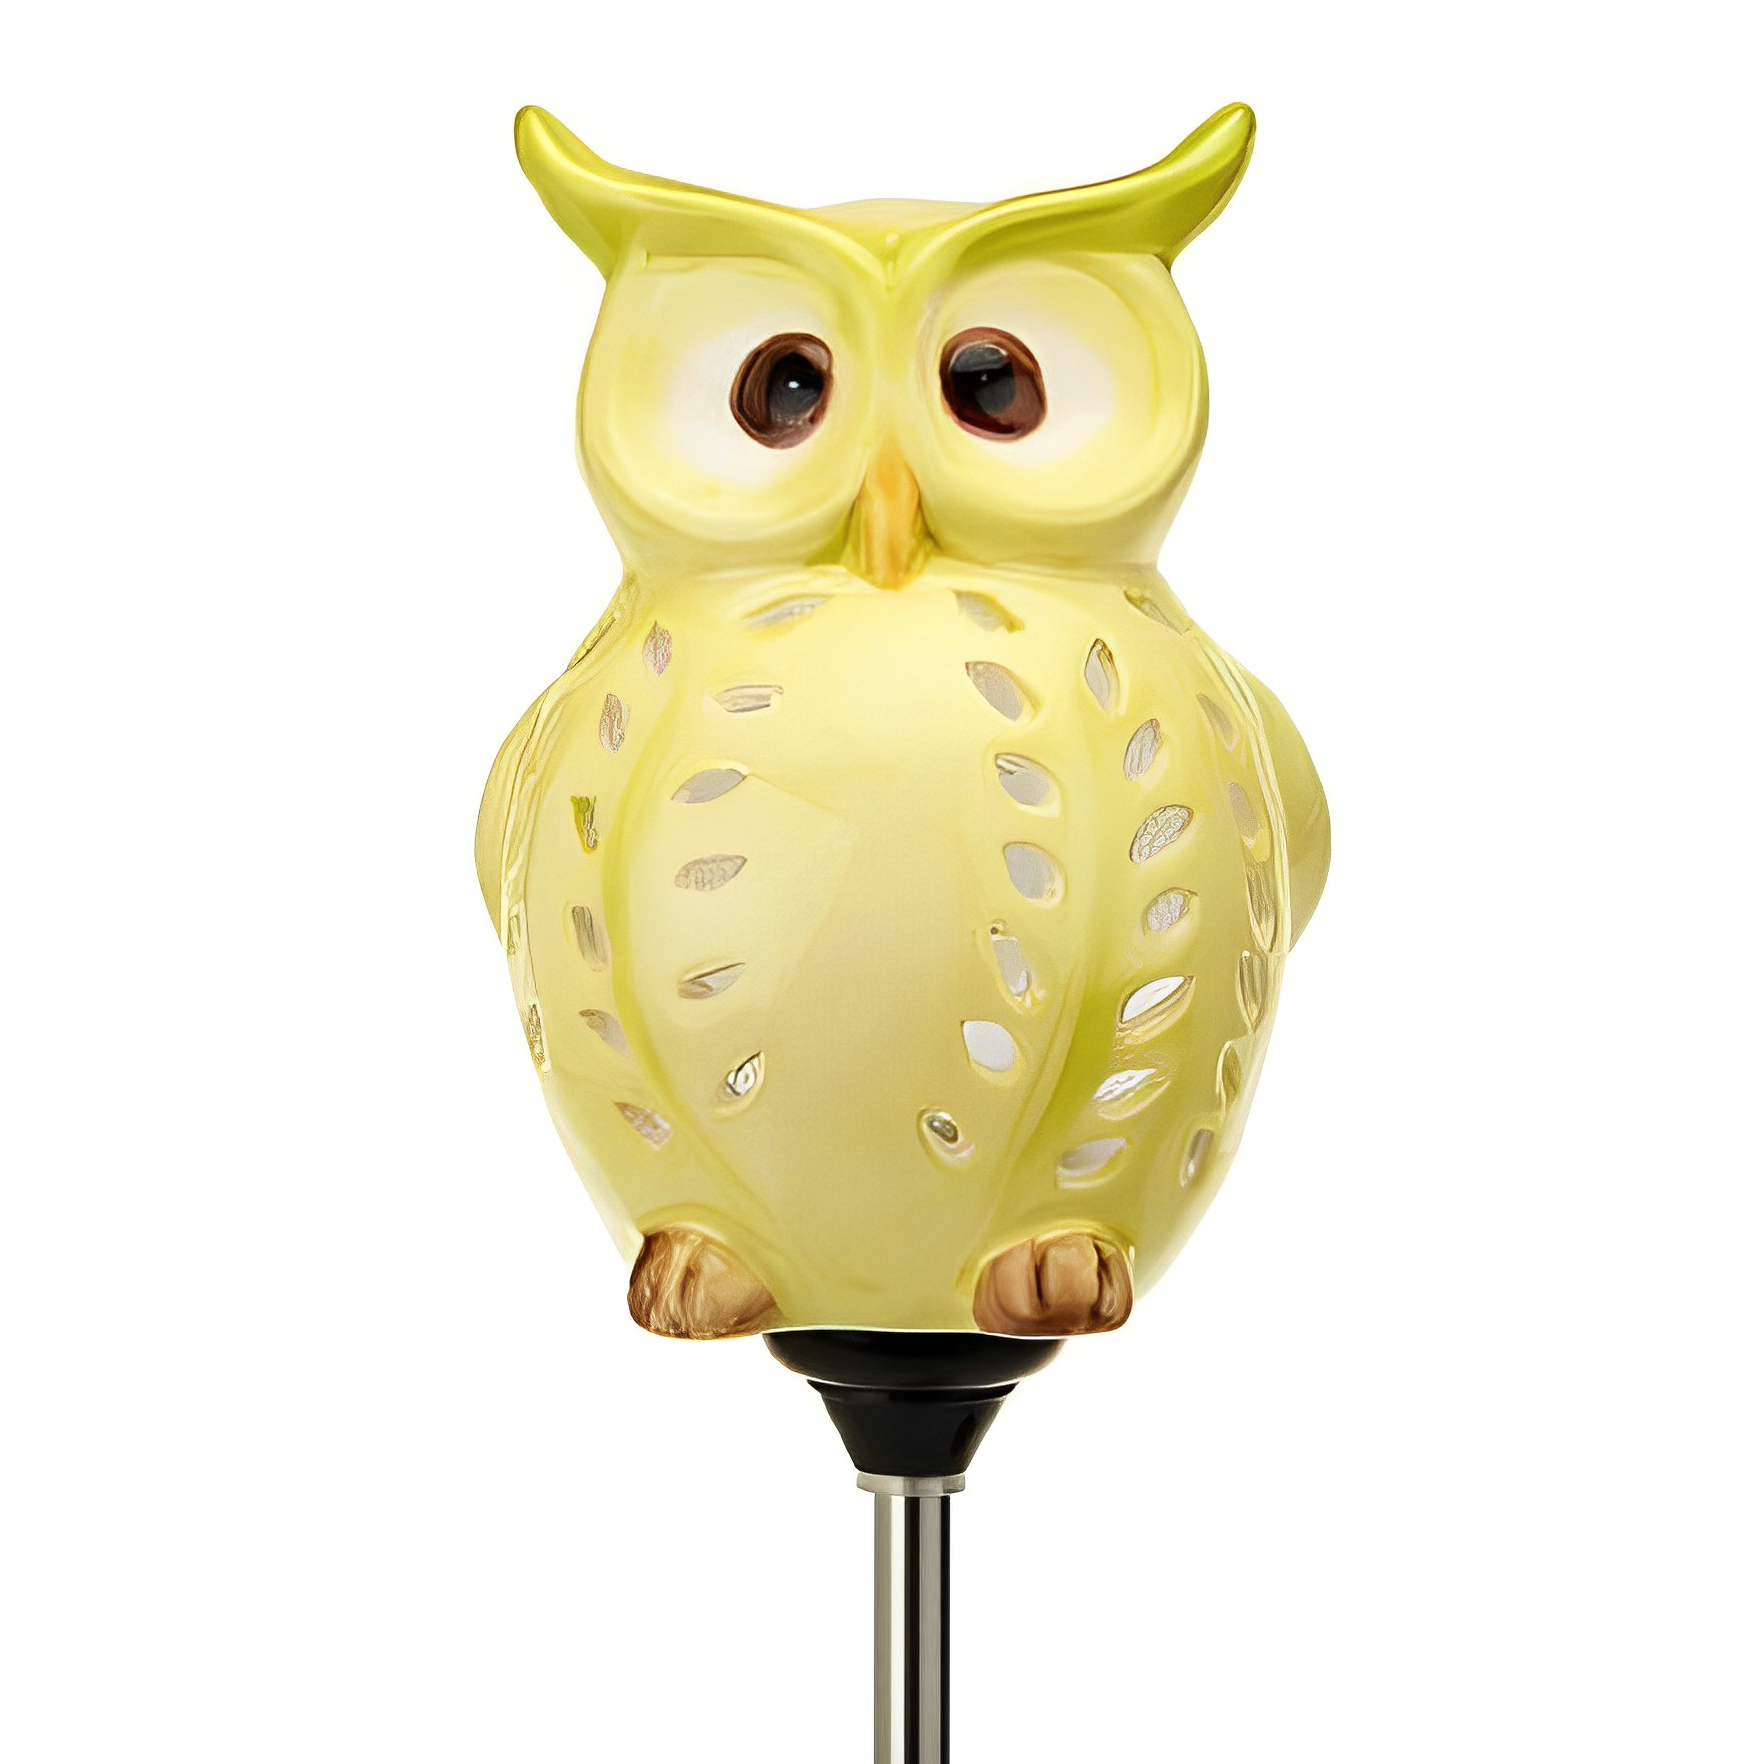 Cute Little Owl Garden Decoration, Best Solar Owl Stake And Solar Owl Light, Ceramic Owl Scarecrow Garden Decor For Your Lawn and Garden - image 1 of 8